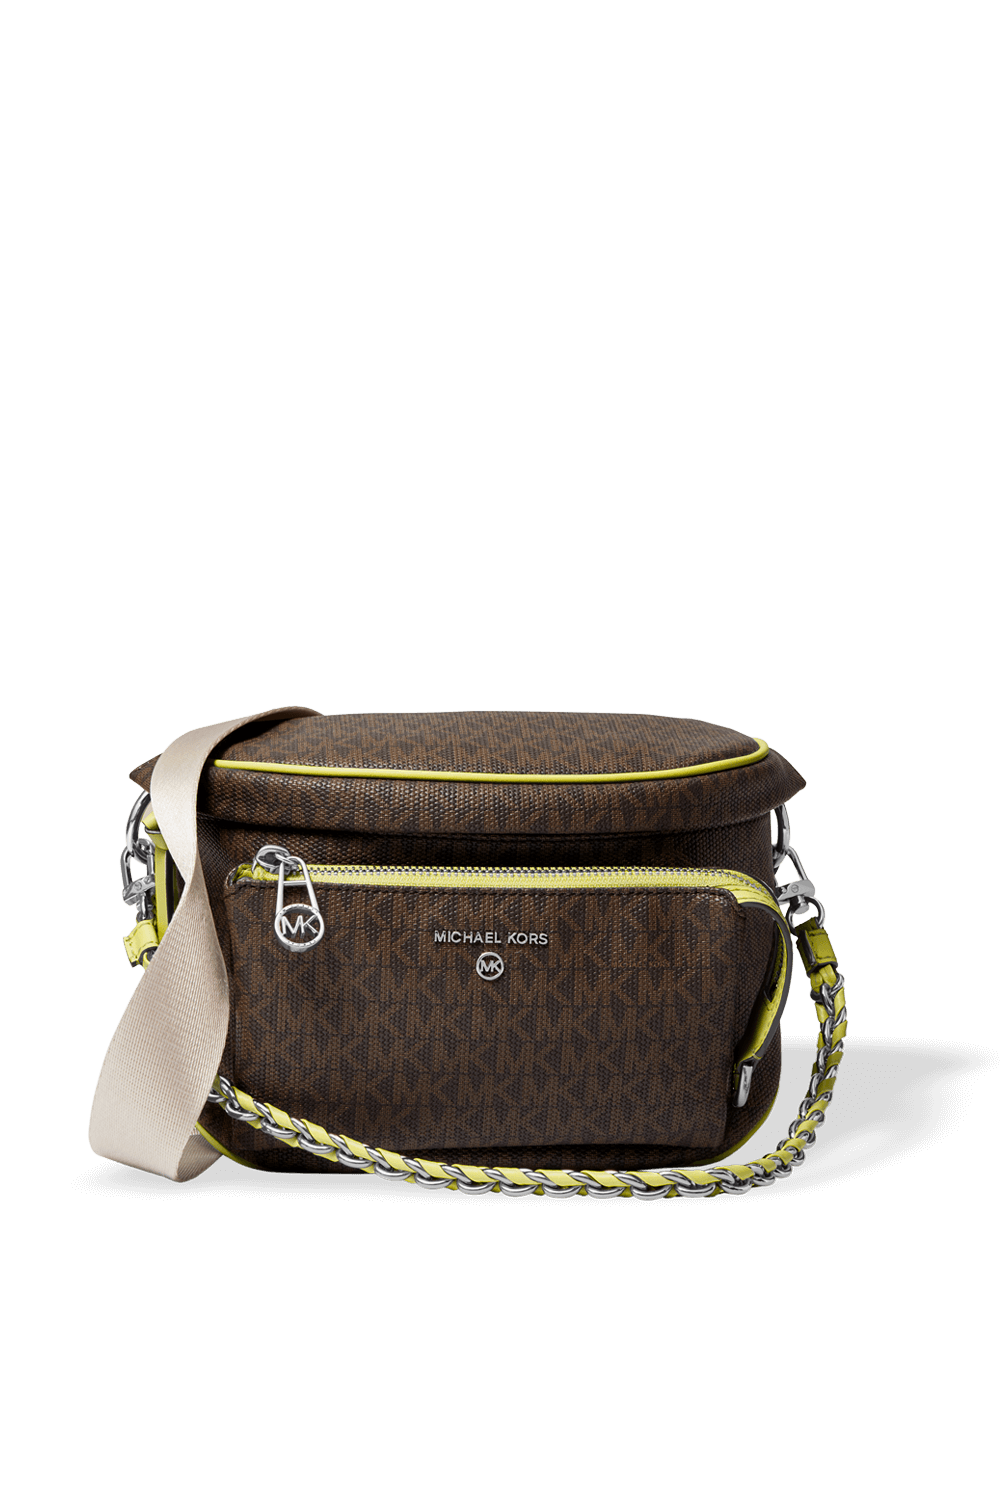 Slater MD Logo Sling Pack in Brown and Lime MICHAEL KORS